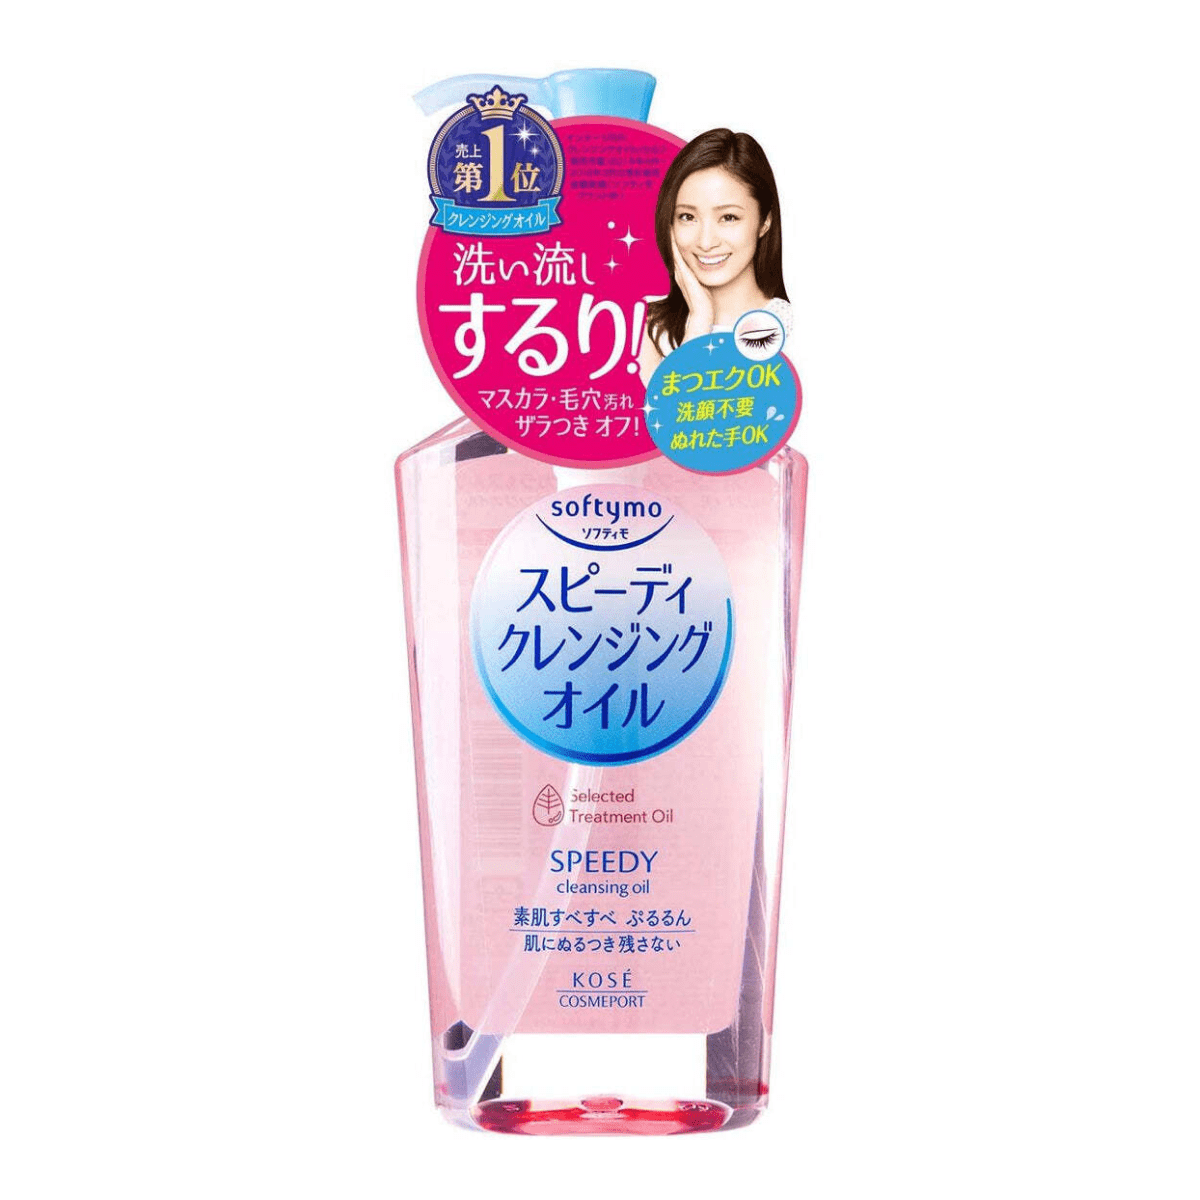 Kose Softymo Speedy cleansing oil 230ml - Best korean skincare products ...